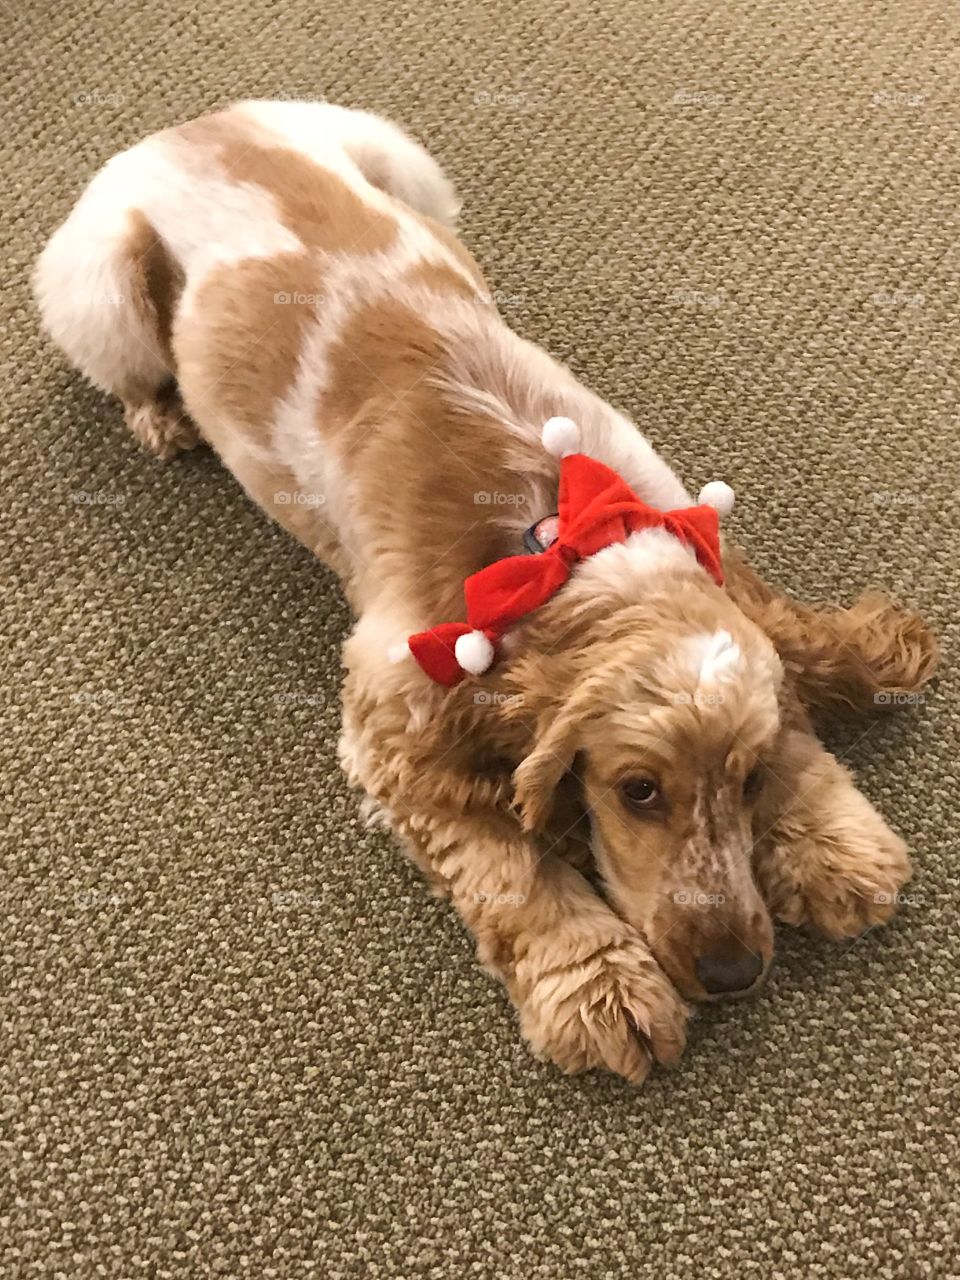 The dentist’s pretty puppy hamming it up for the camera. She’s adorable and she knows it! She is especially cute with her red Christmas collar. 